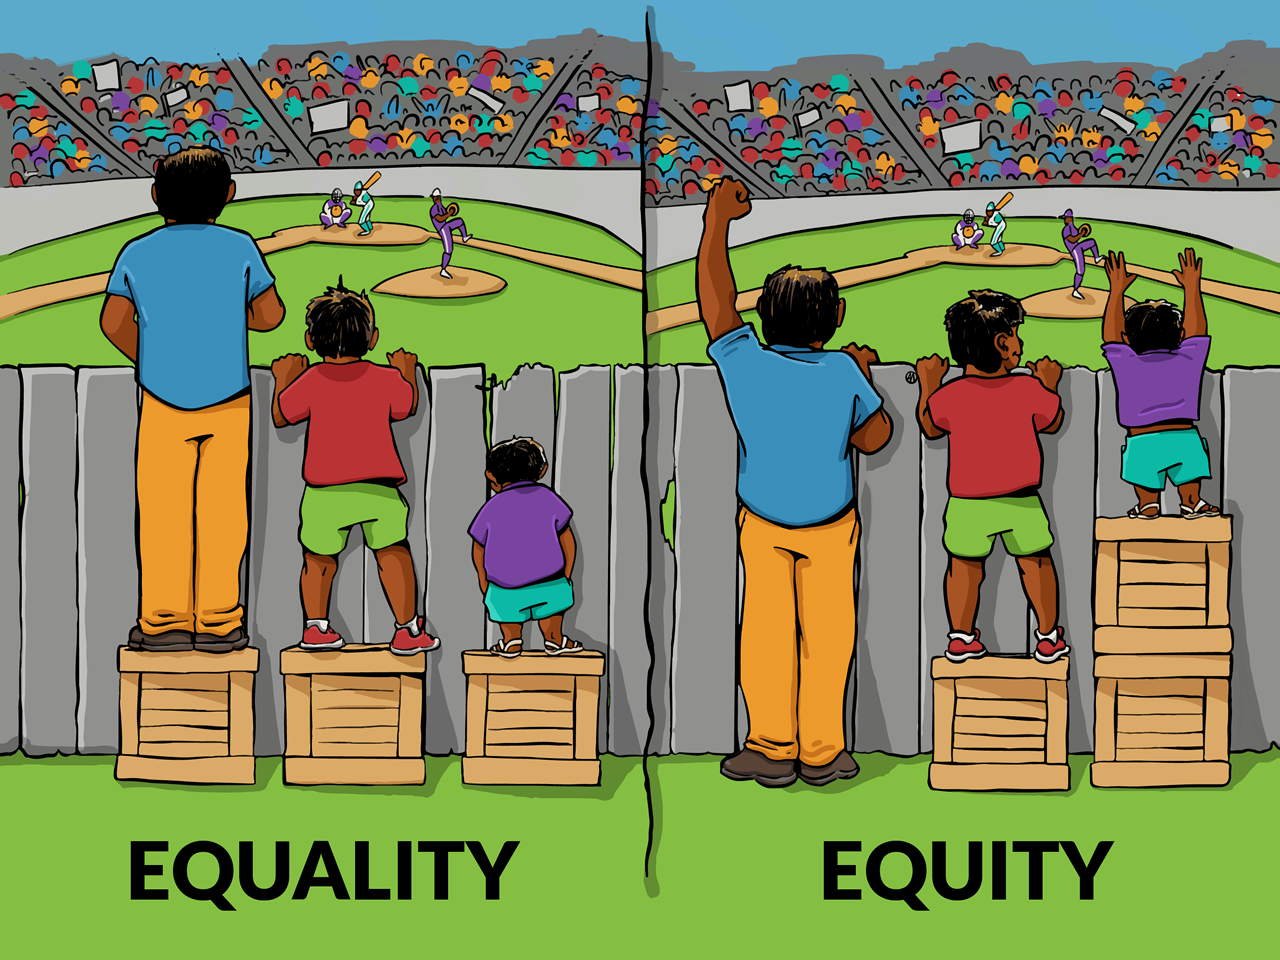 Cartoon depicting equality and equity. EQUALITY: 3 people of different heights all standing on the same size box to try and look over a fence. EQUITY: 3 people of different heights all standing on appropriate height boxes to look over a fence.